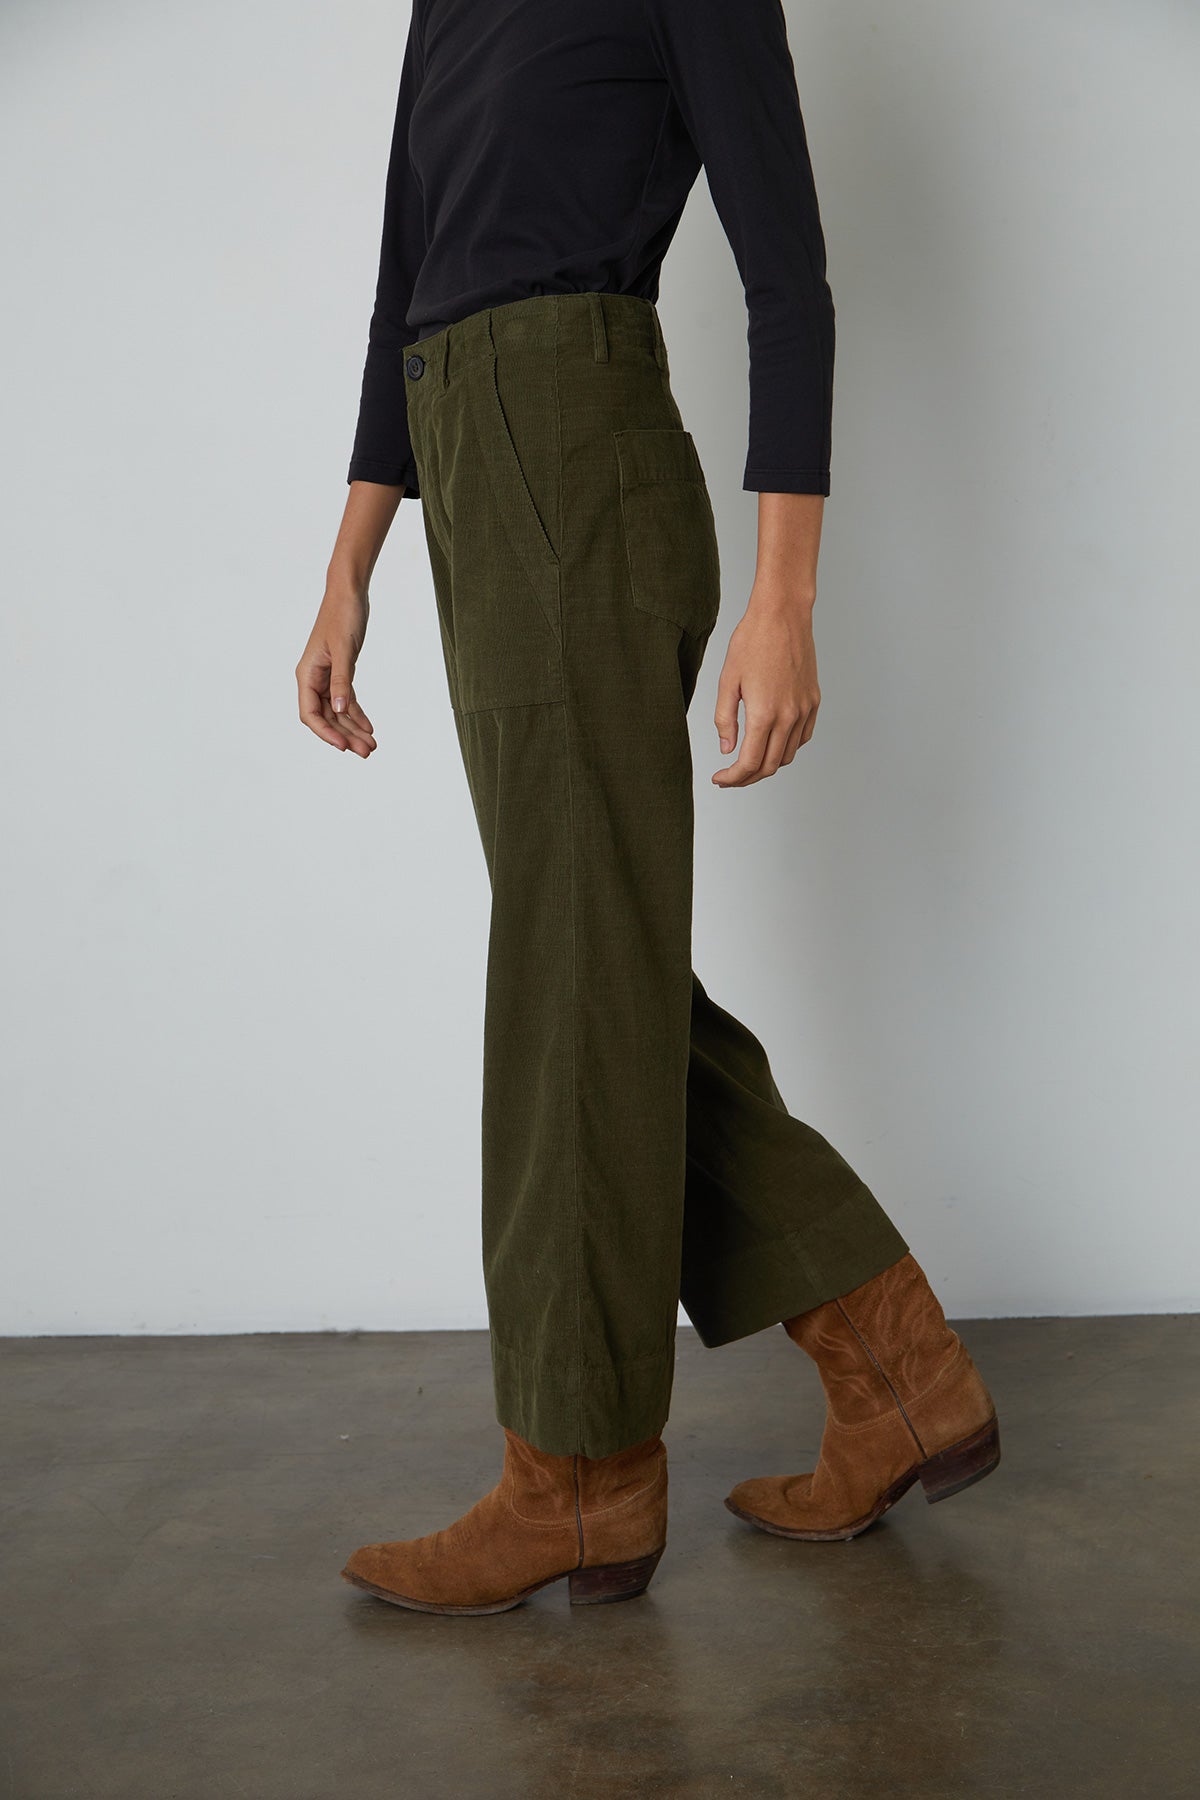 Vera Corduroy Wide Leg Pant in Aloe side pocket standing with boots-26654355128513